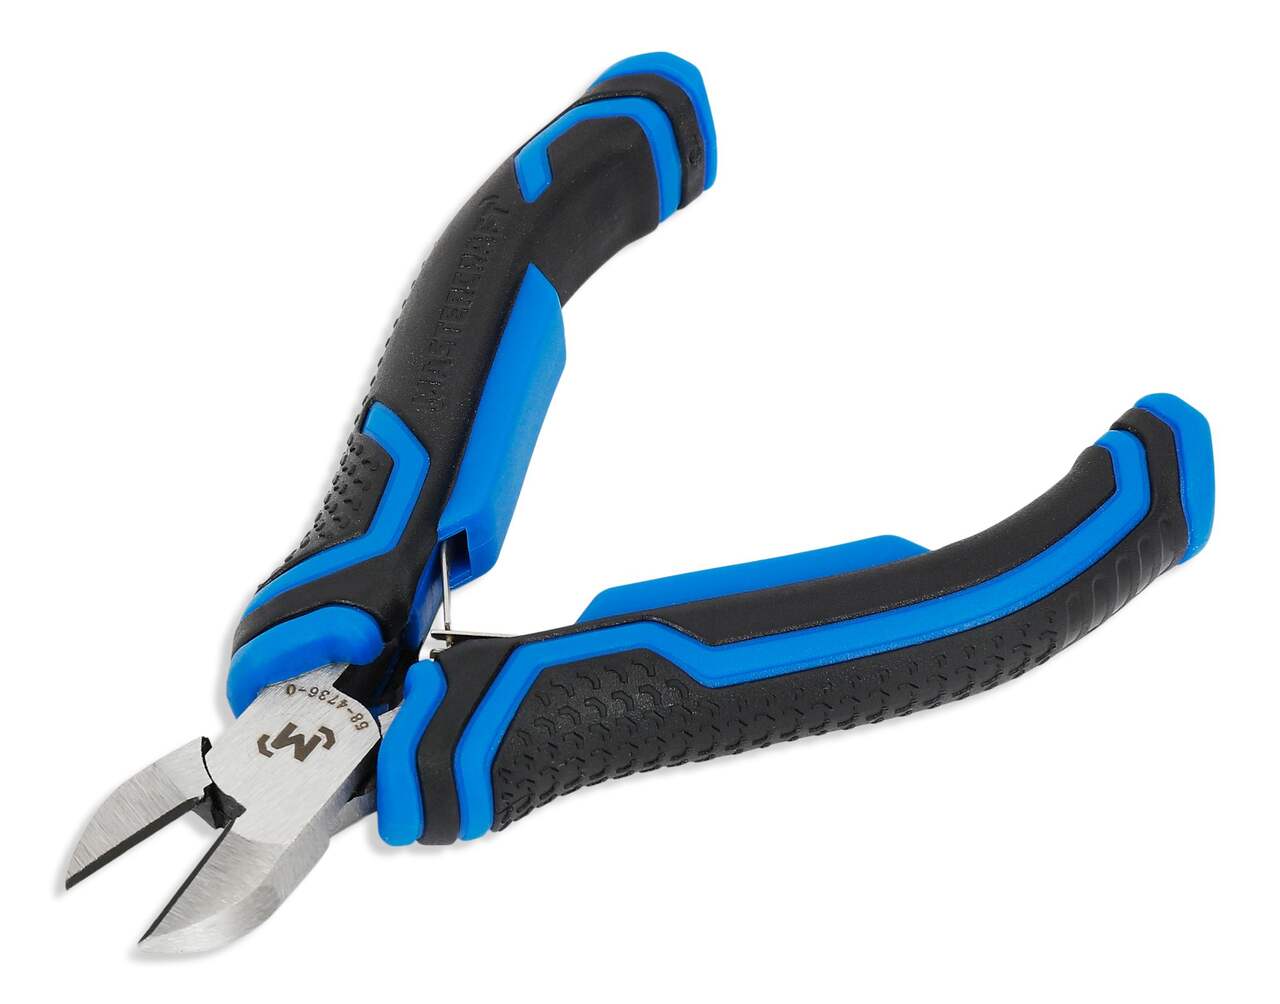 https://media-www.canadiantire.ca/product/fixing/tools/metal-working/0584736/mastercraft-mini-diagonal-cutting-pliers-2a98a334-0c76-4d92-a233-55180dc0f93d-jpgrendition.jpg?imdensity=1&imwidth=640&impolicy=mZoom